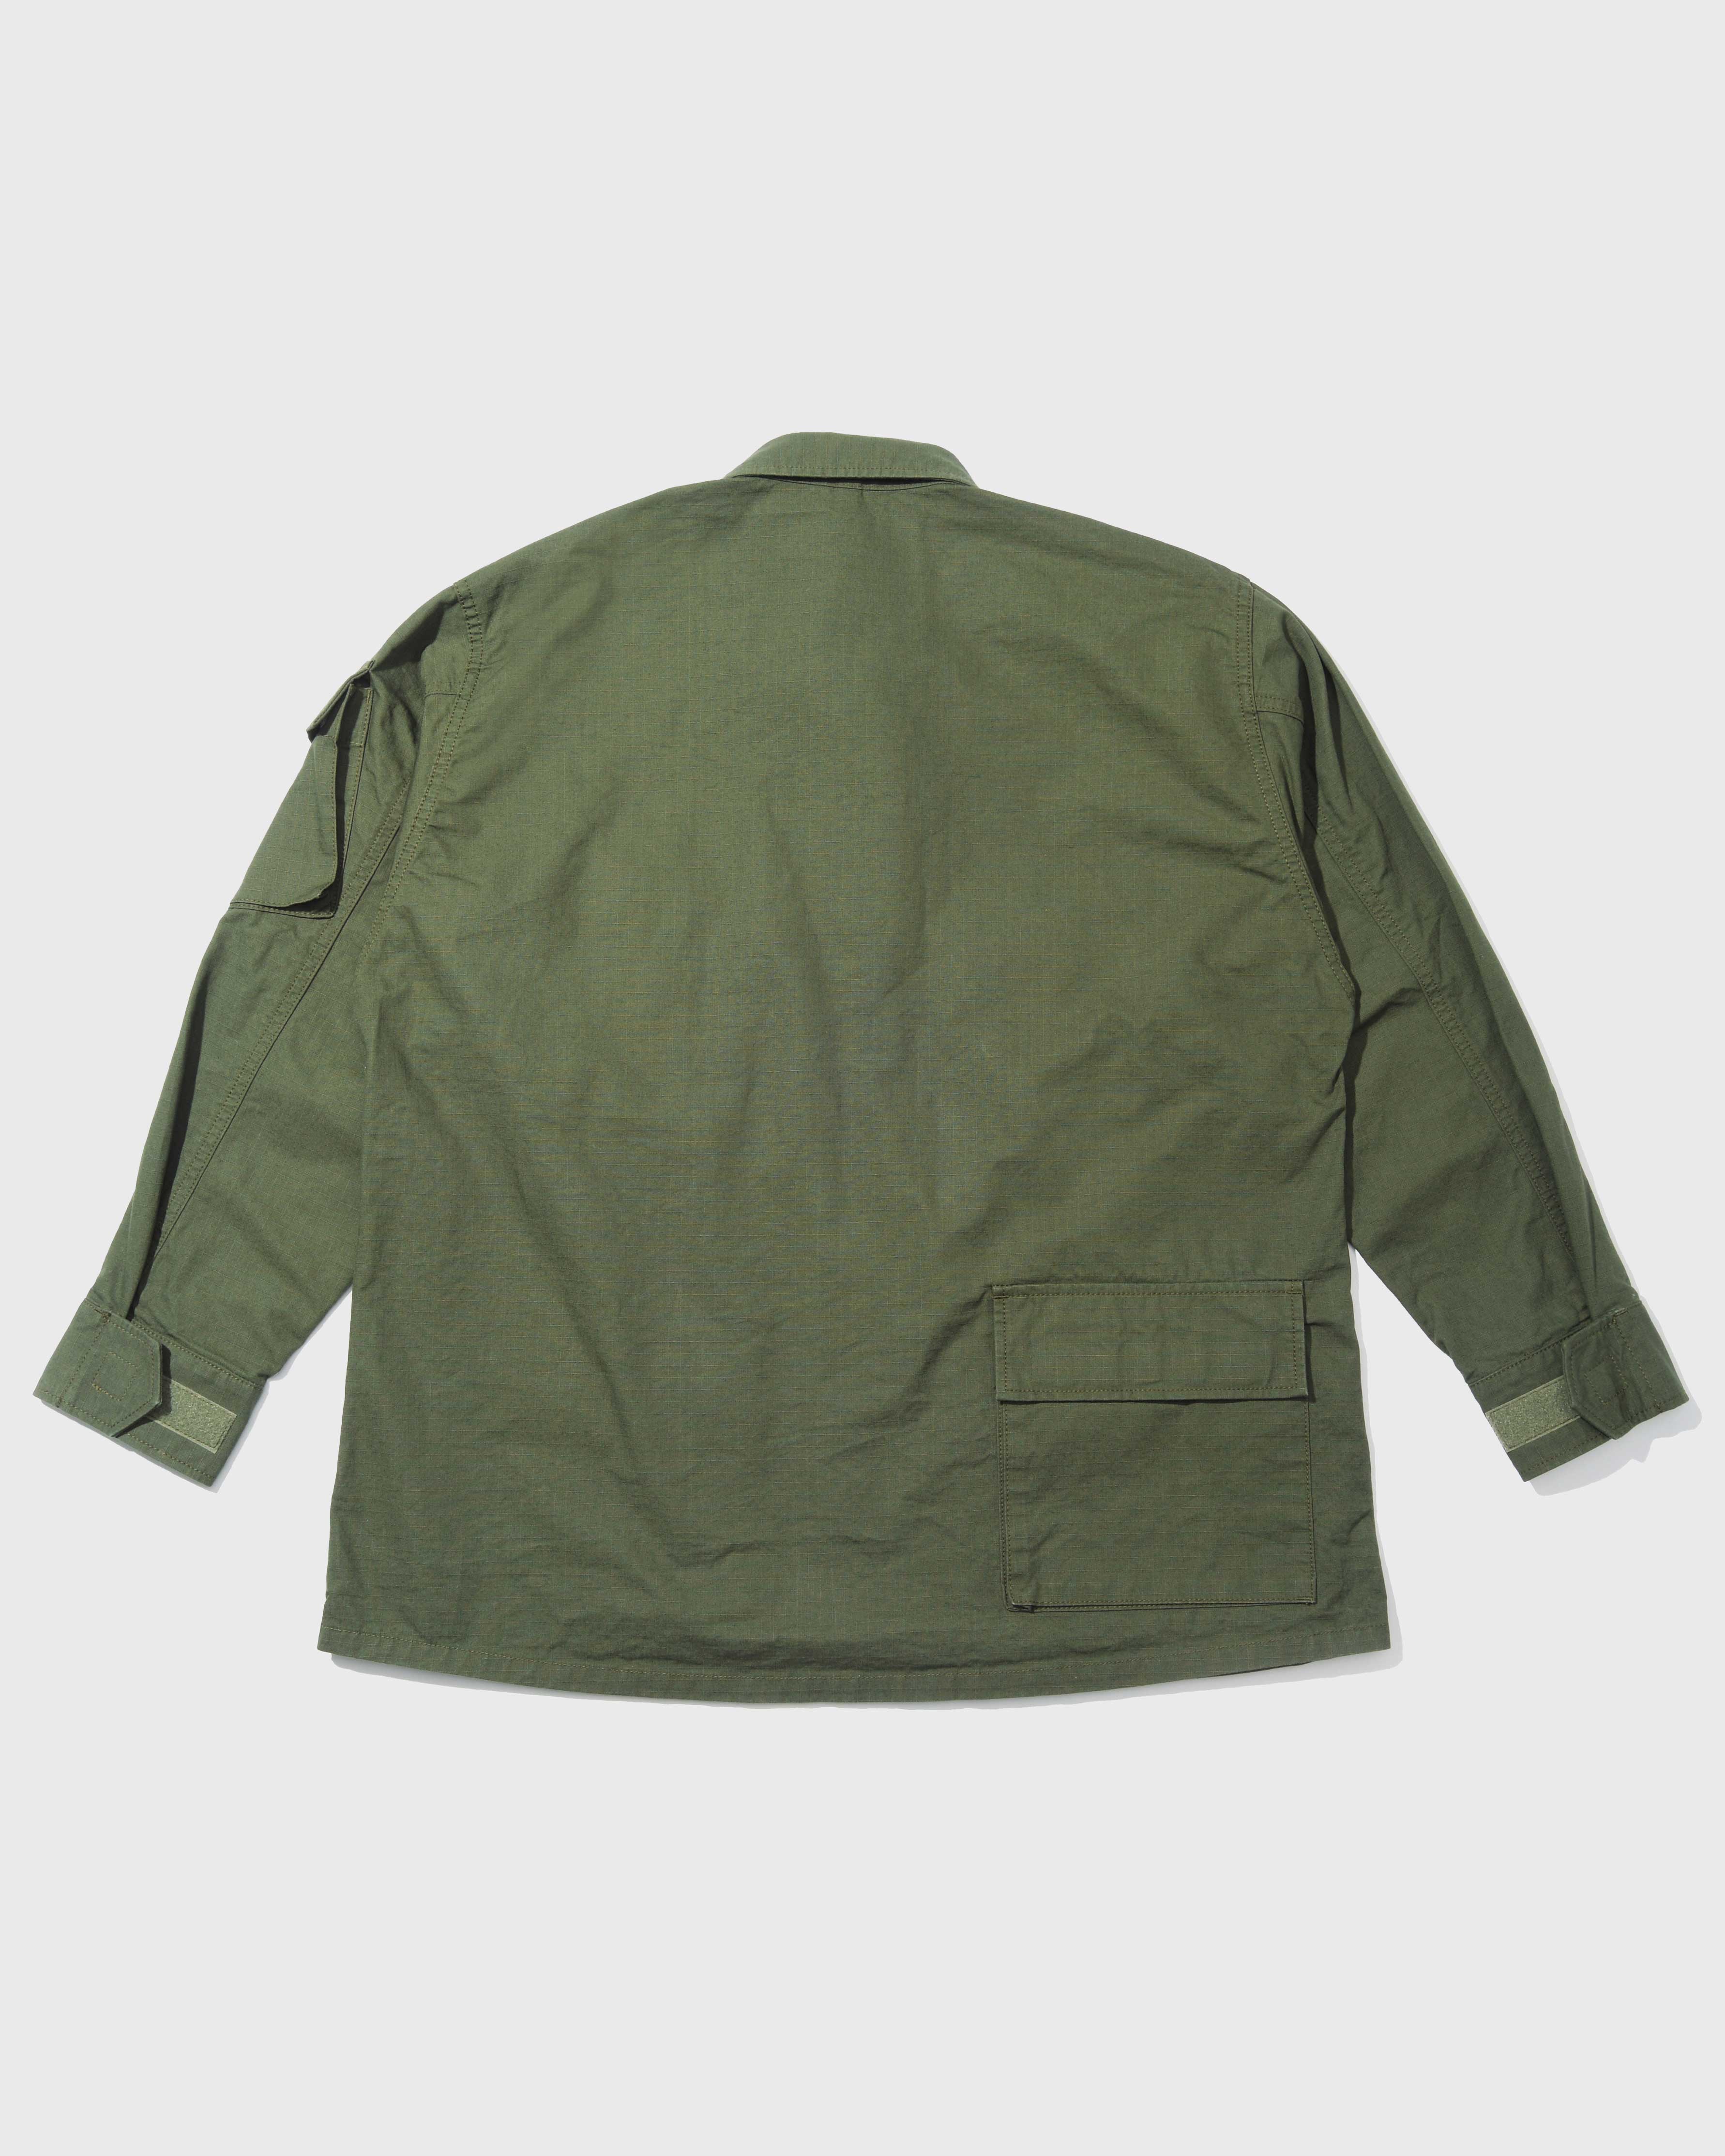 Modified Military Shirt - Olive